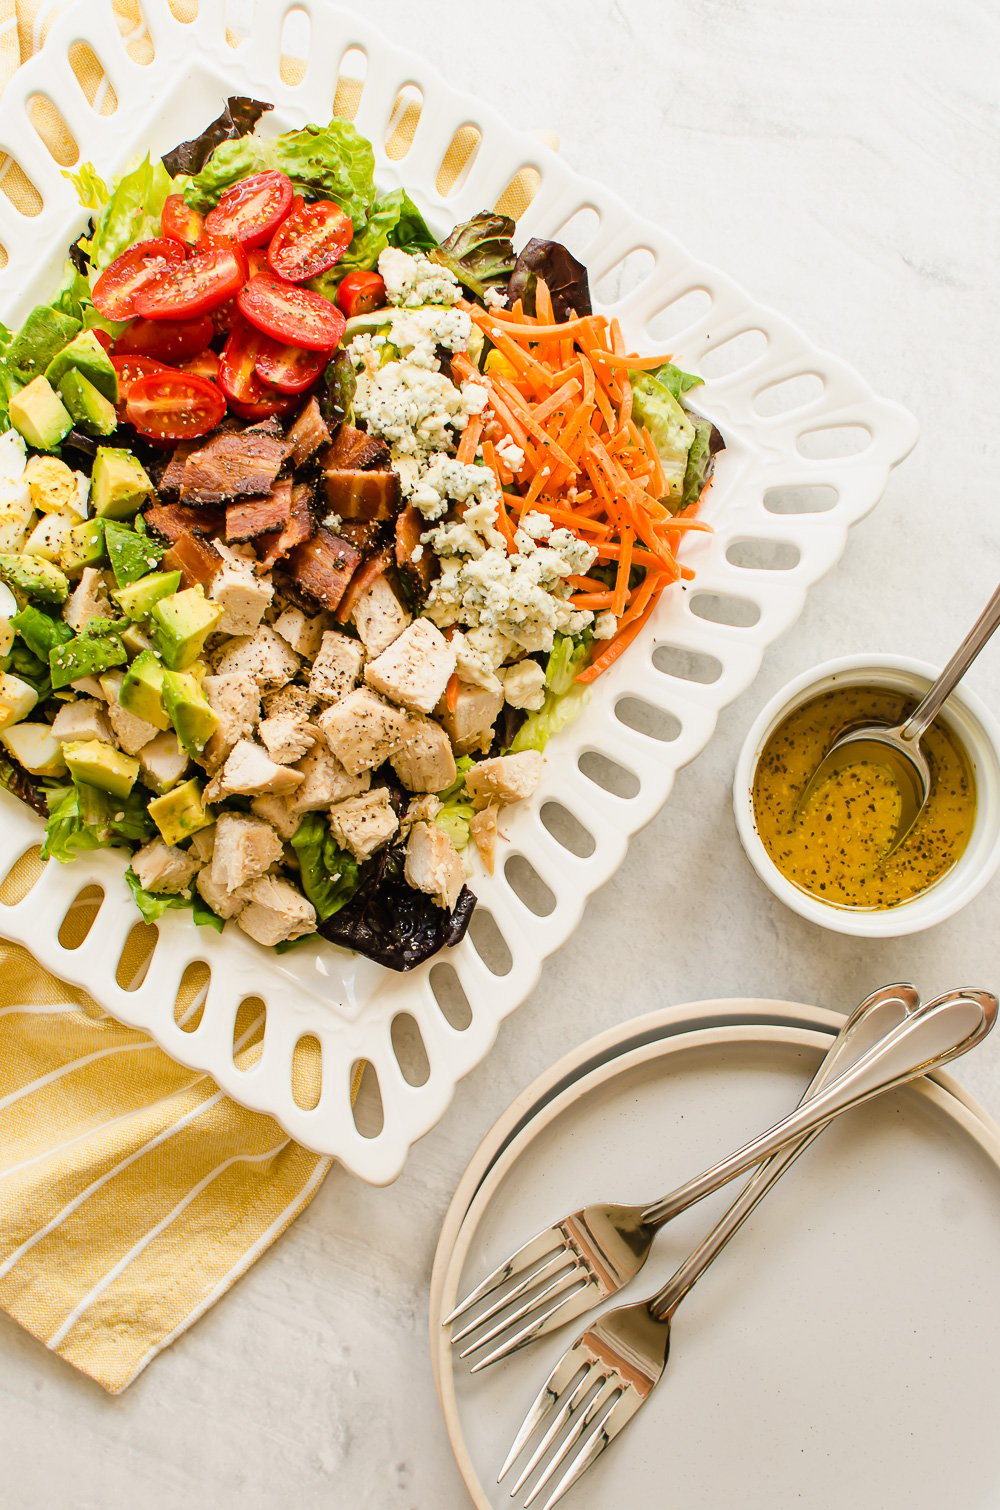 Cobb salad on a white plate with dressing on the side.